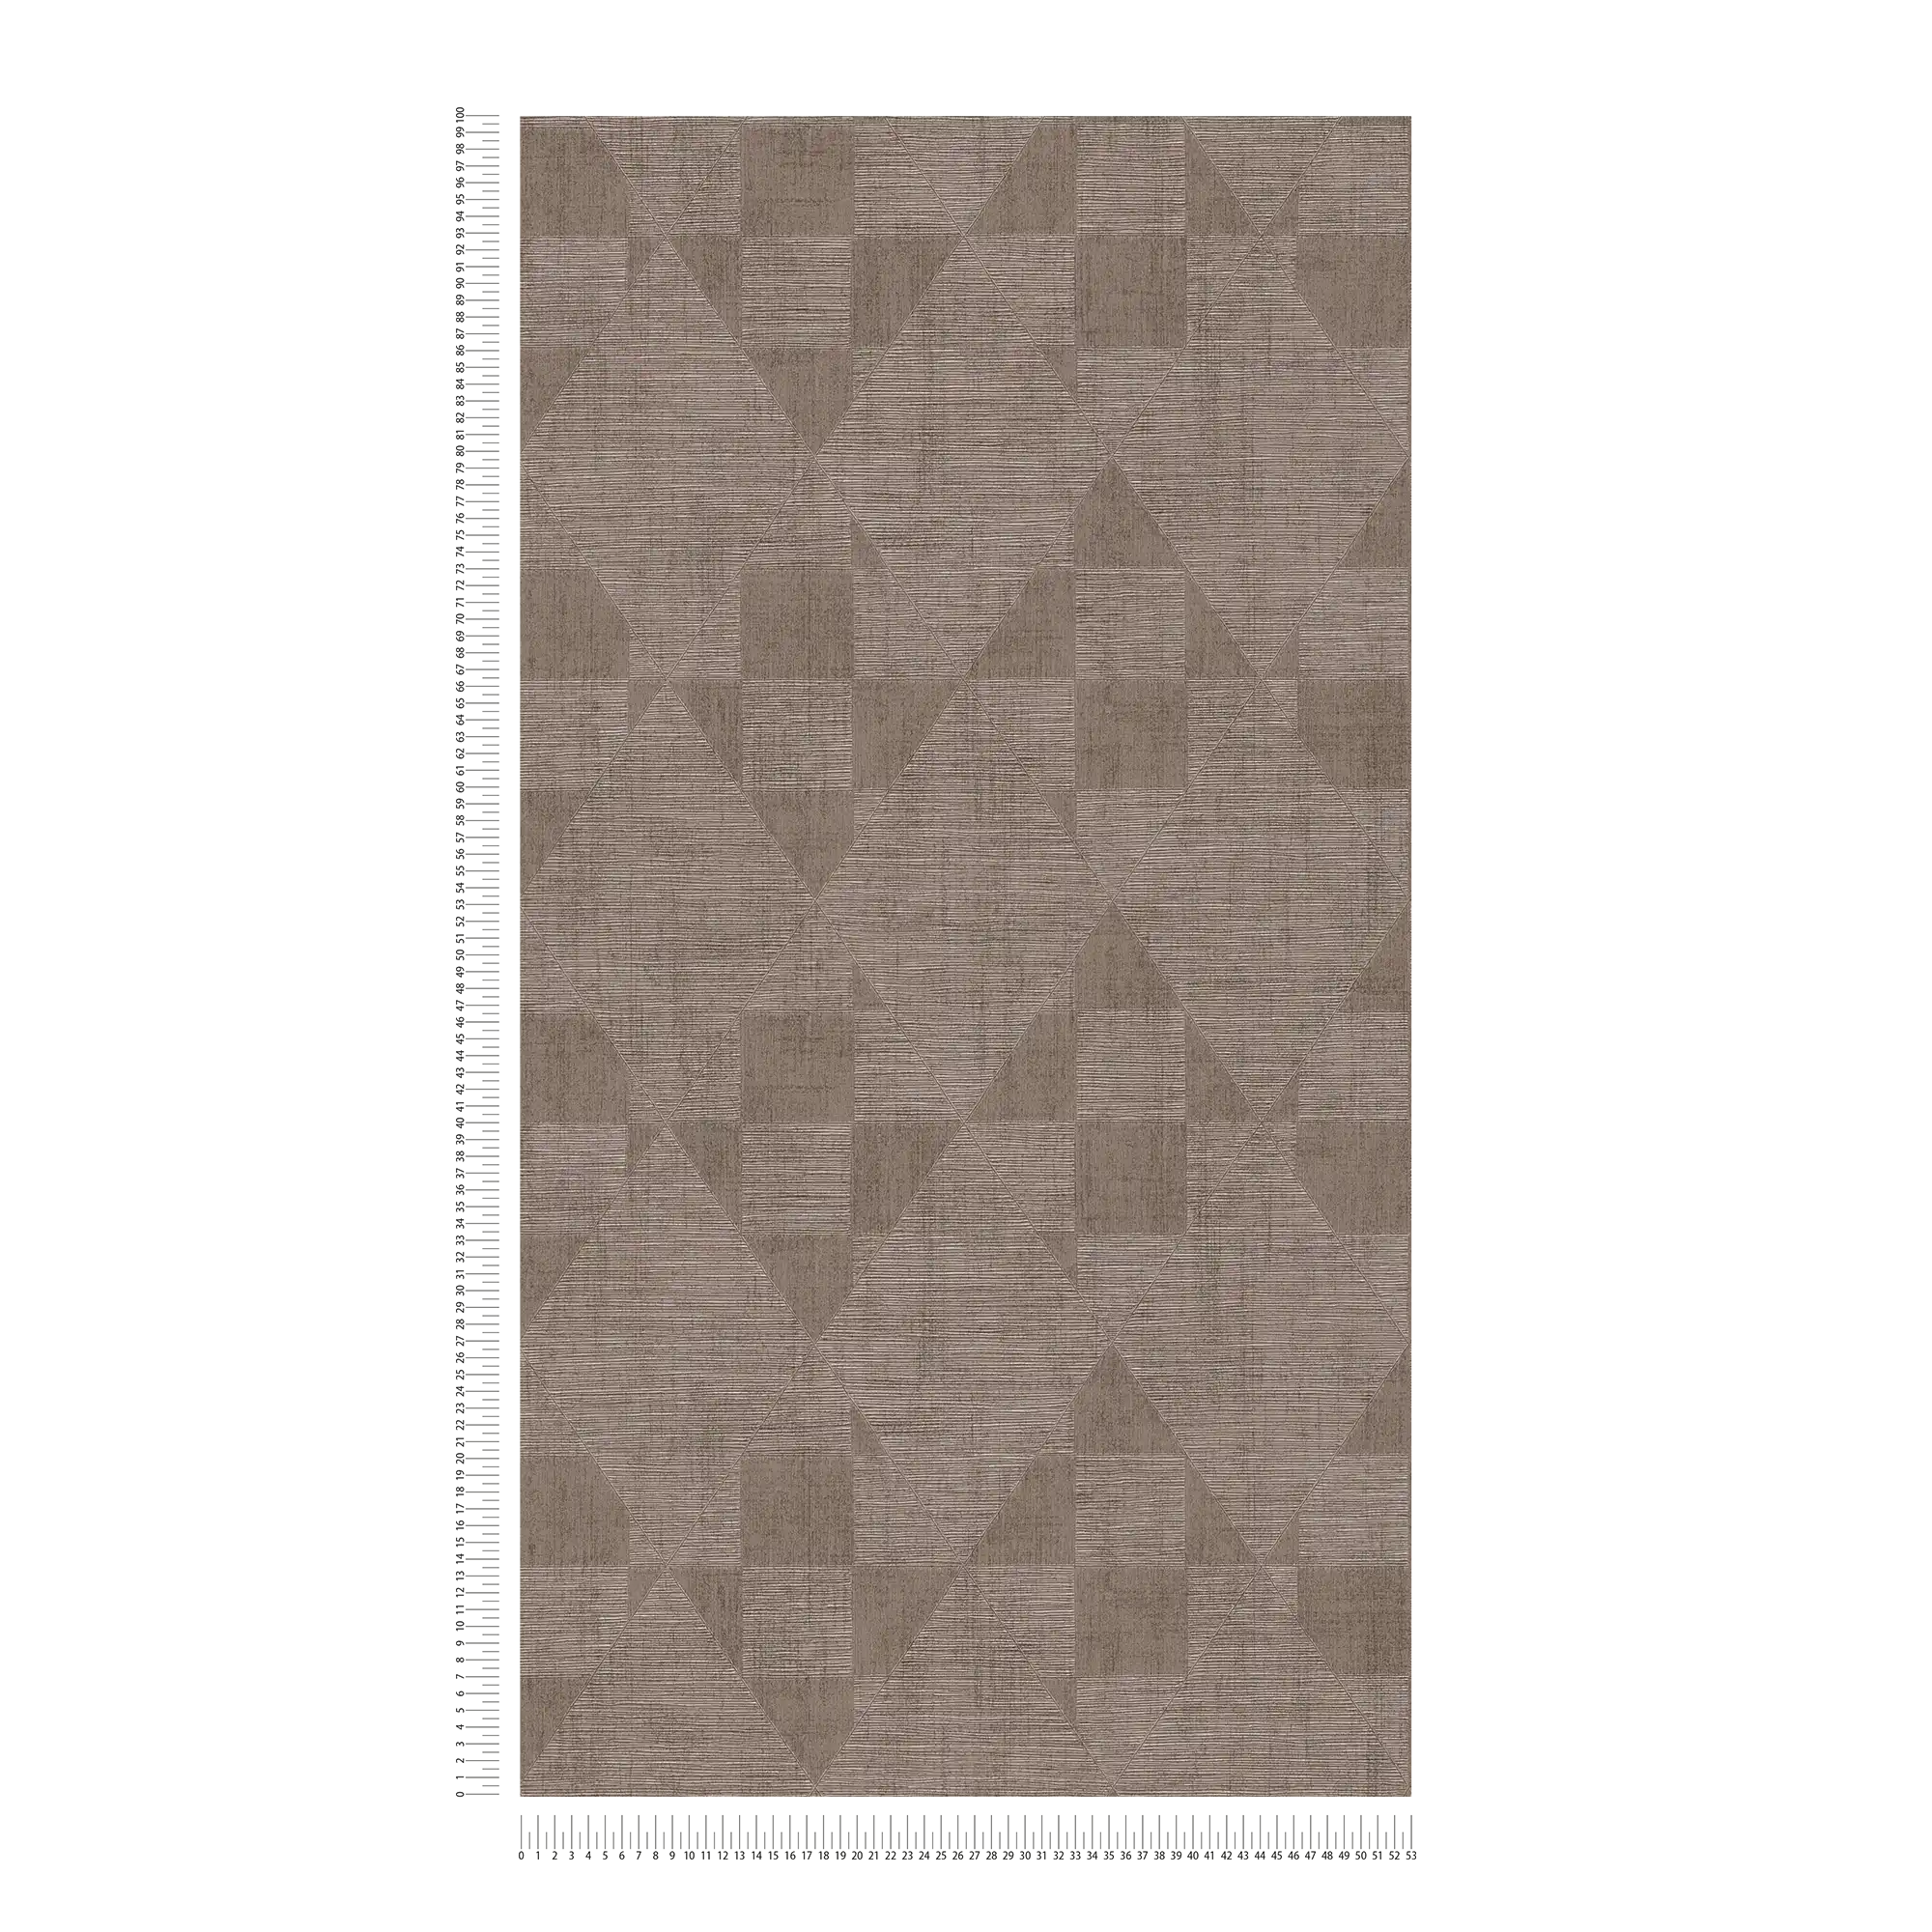             Melted wallpaper dark brown with retro pattern - brown
        